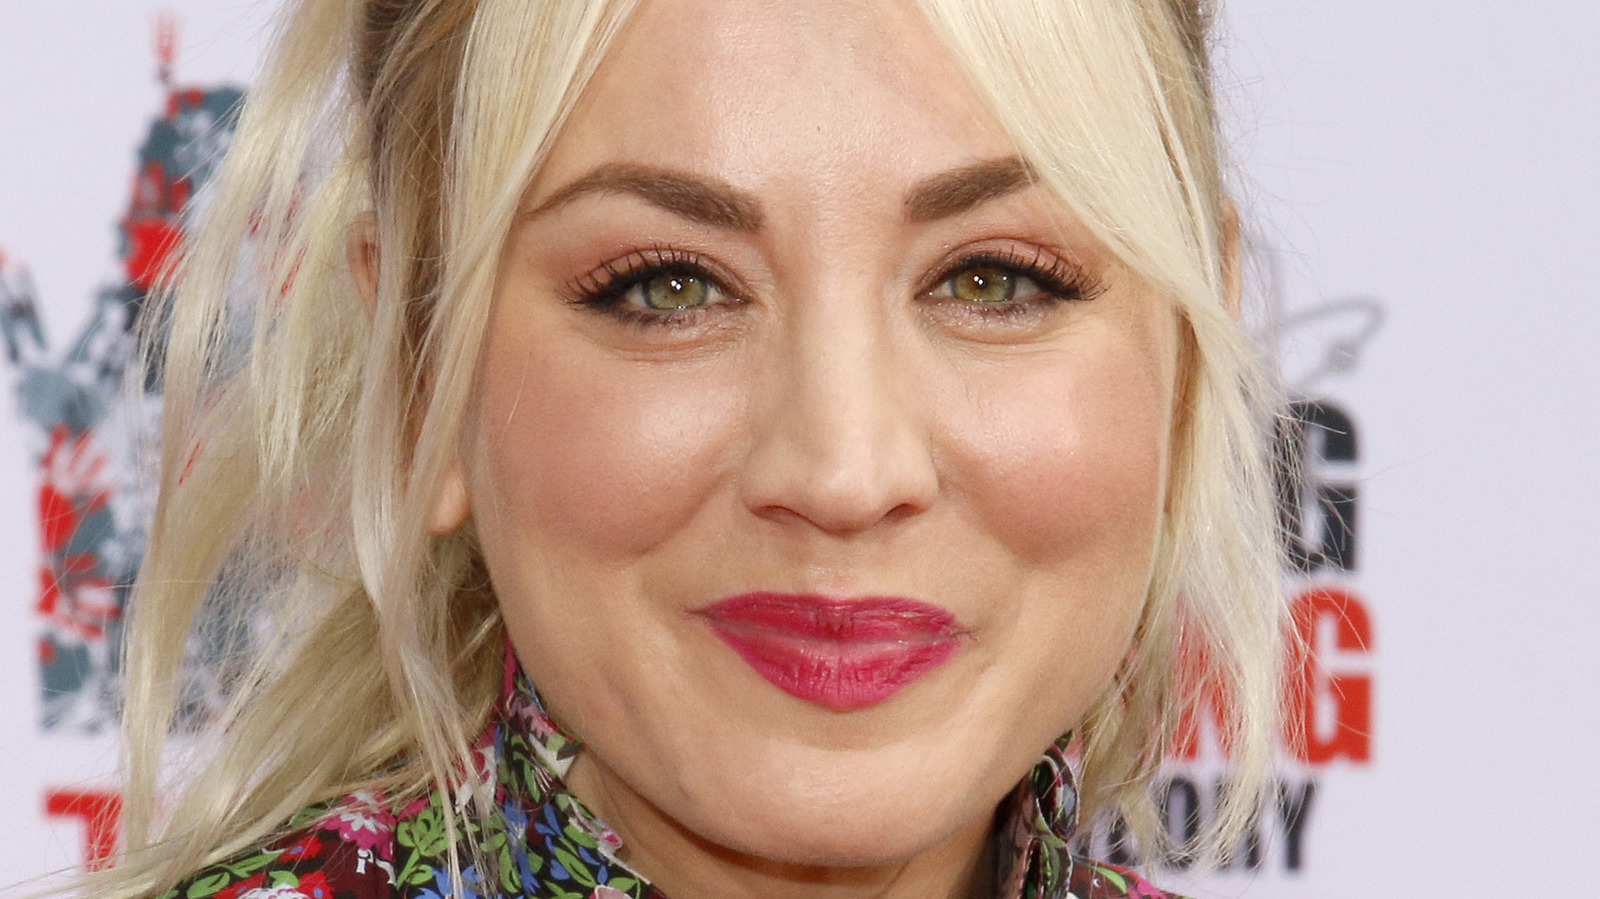 unknown facts about kaley cuoco